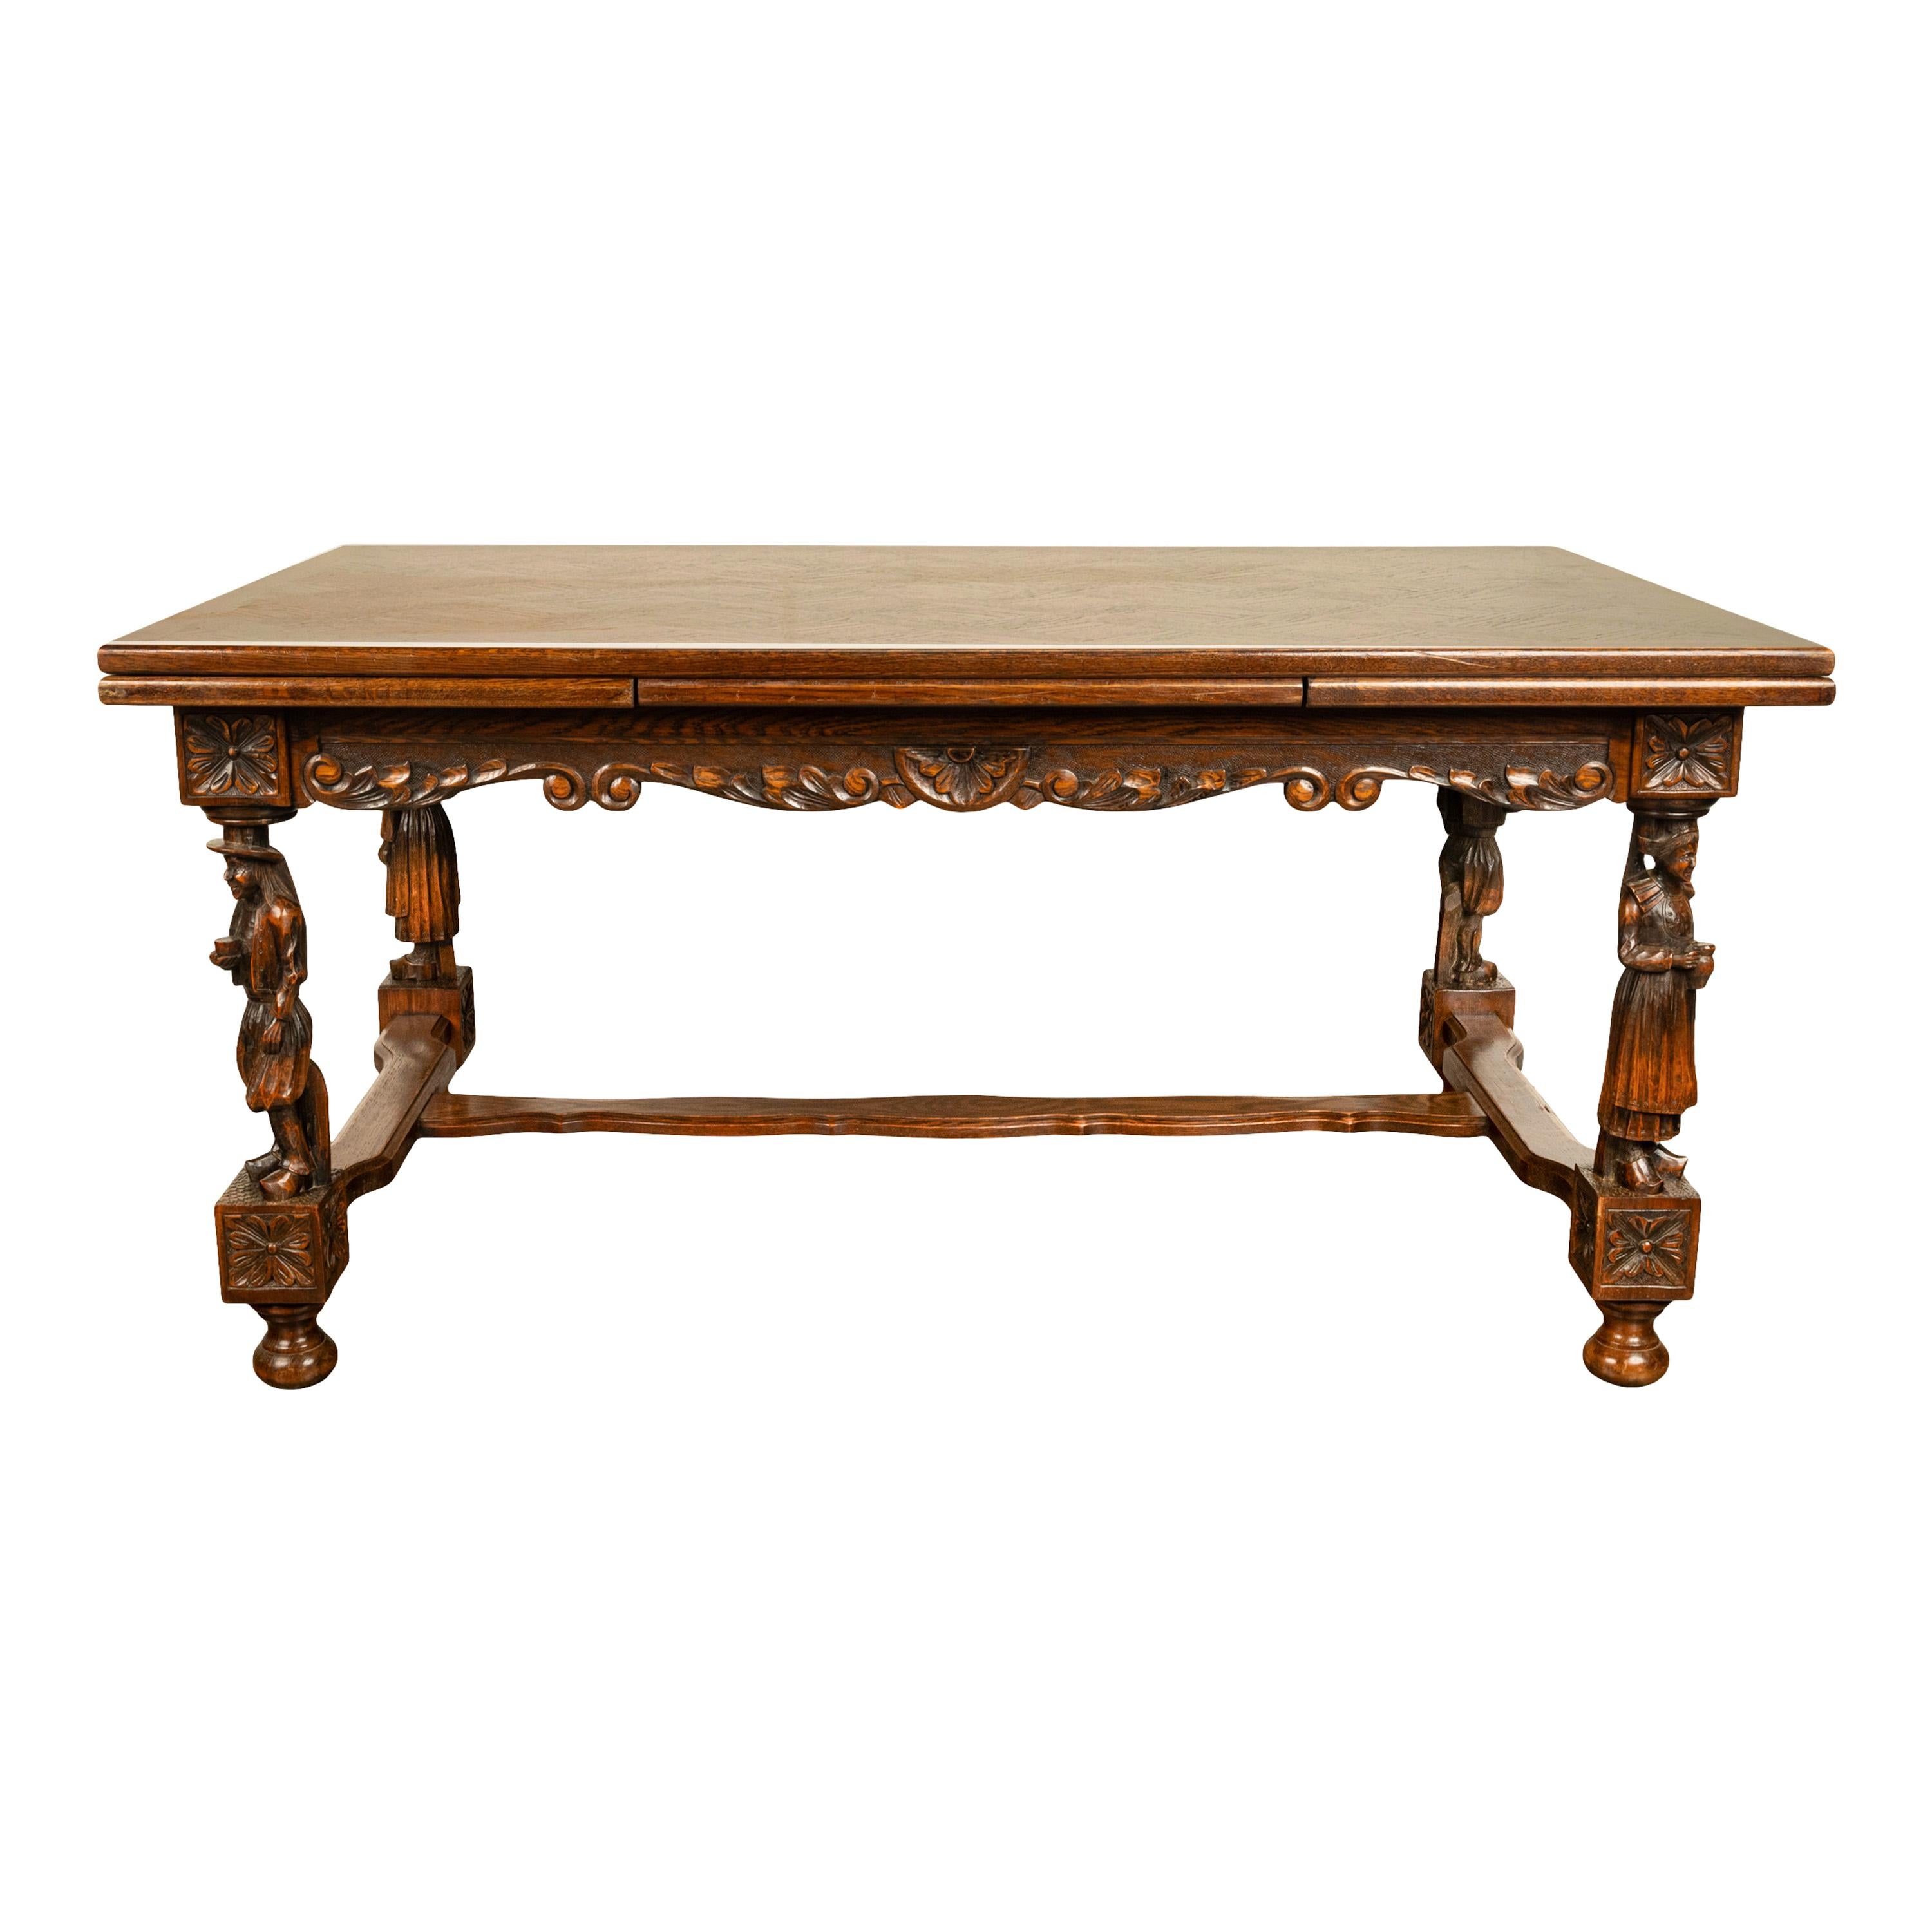 Antique Carved Figural French Breton Inlaid Dining Extending Table Brittany 1900 For Sale 5